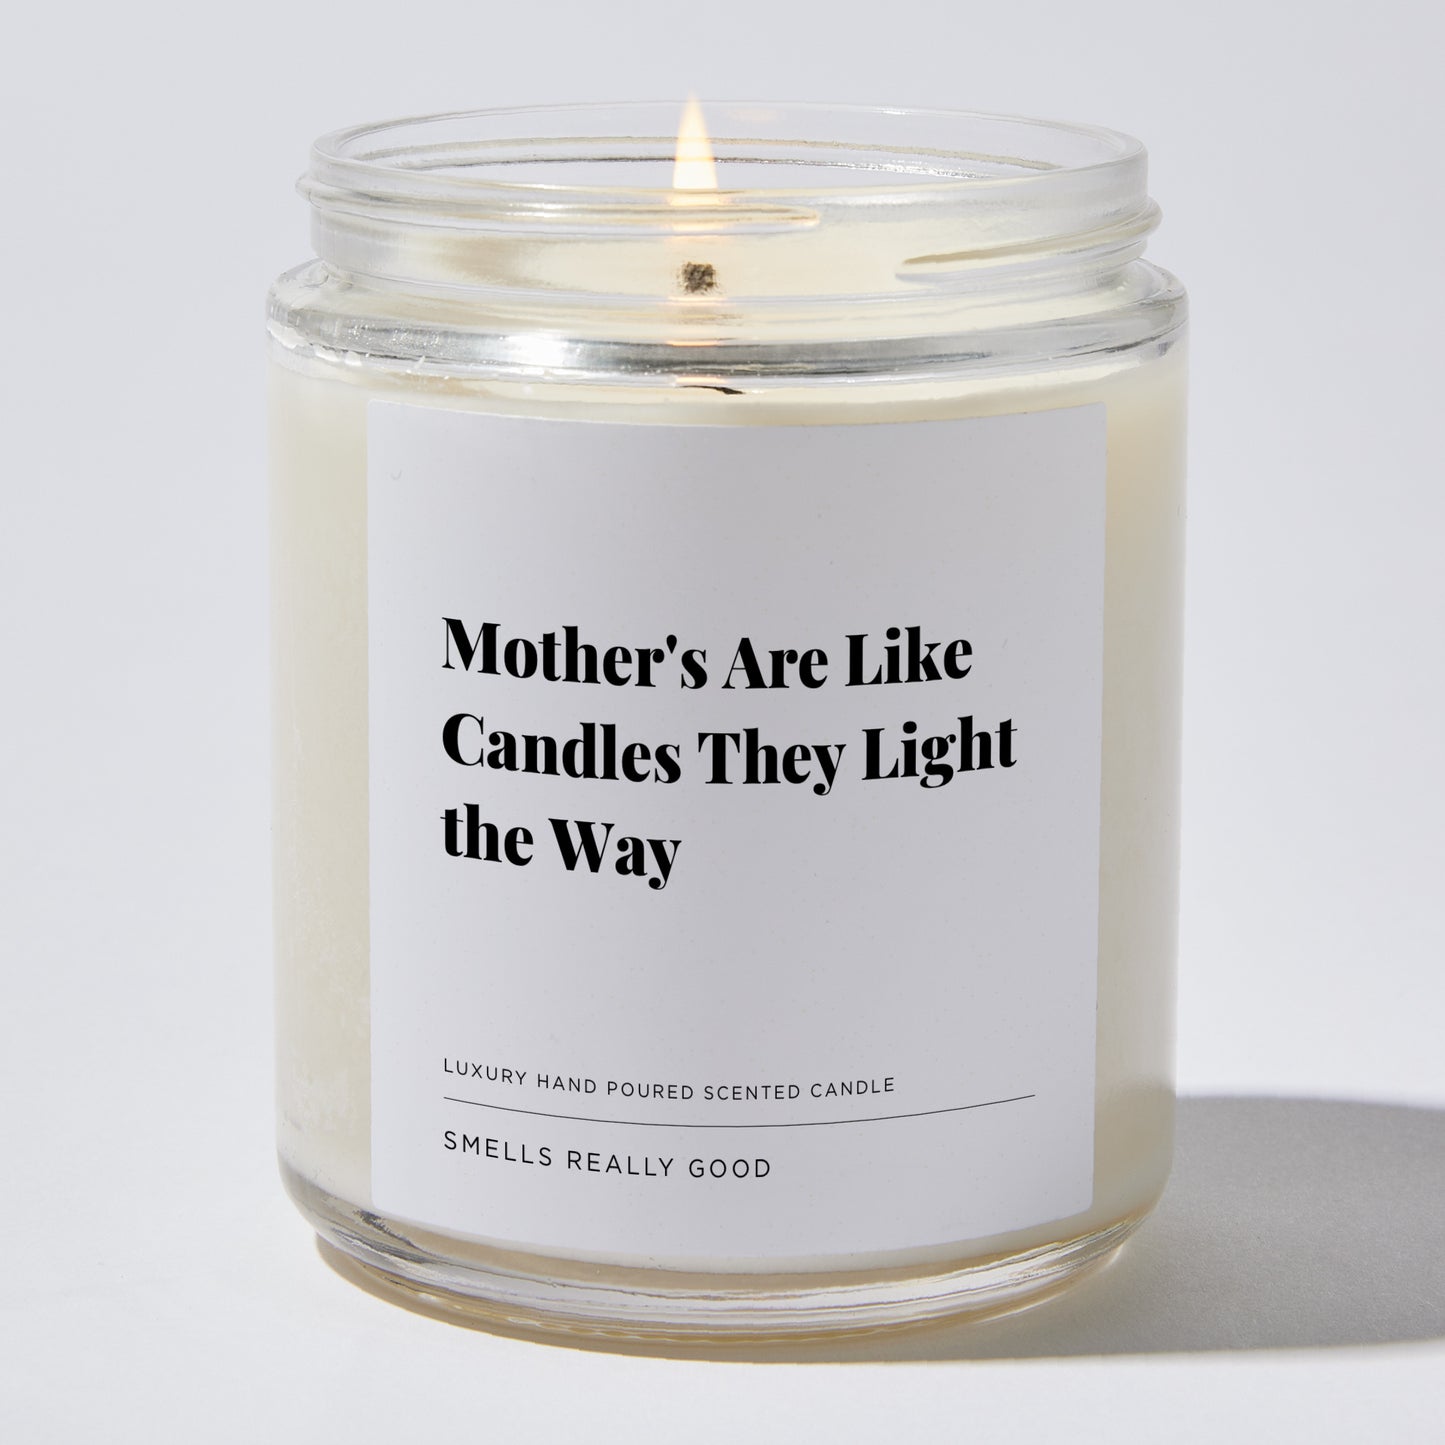 Gift for Mom - Mother's are like candles they light the way - Candle